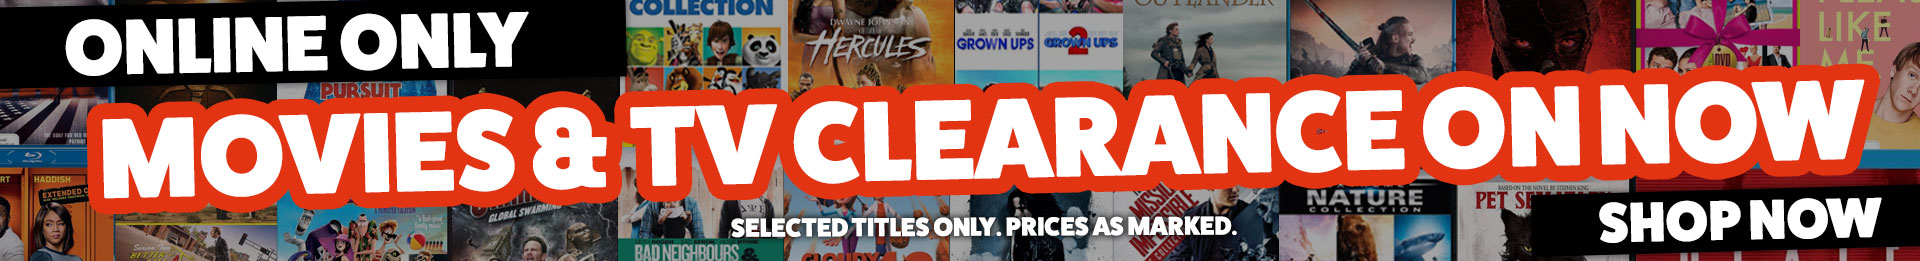 Shop All Movies & TV Shows Priced To Clear